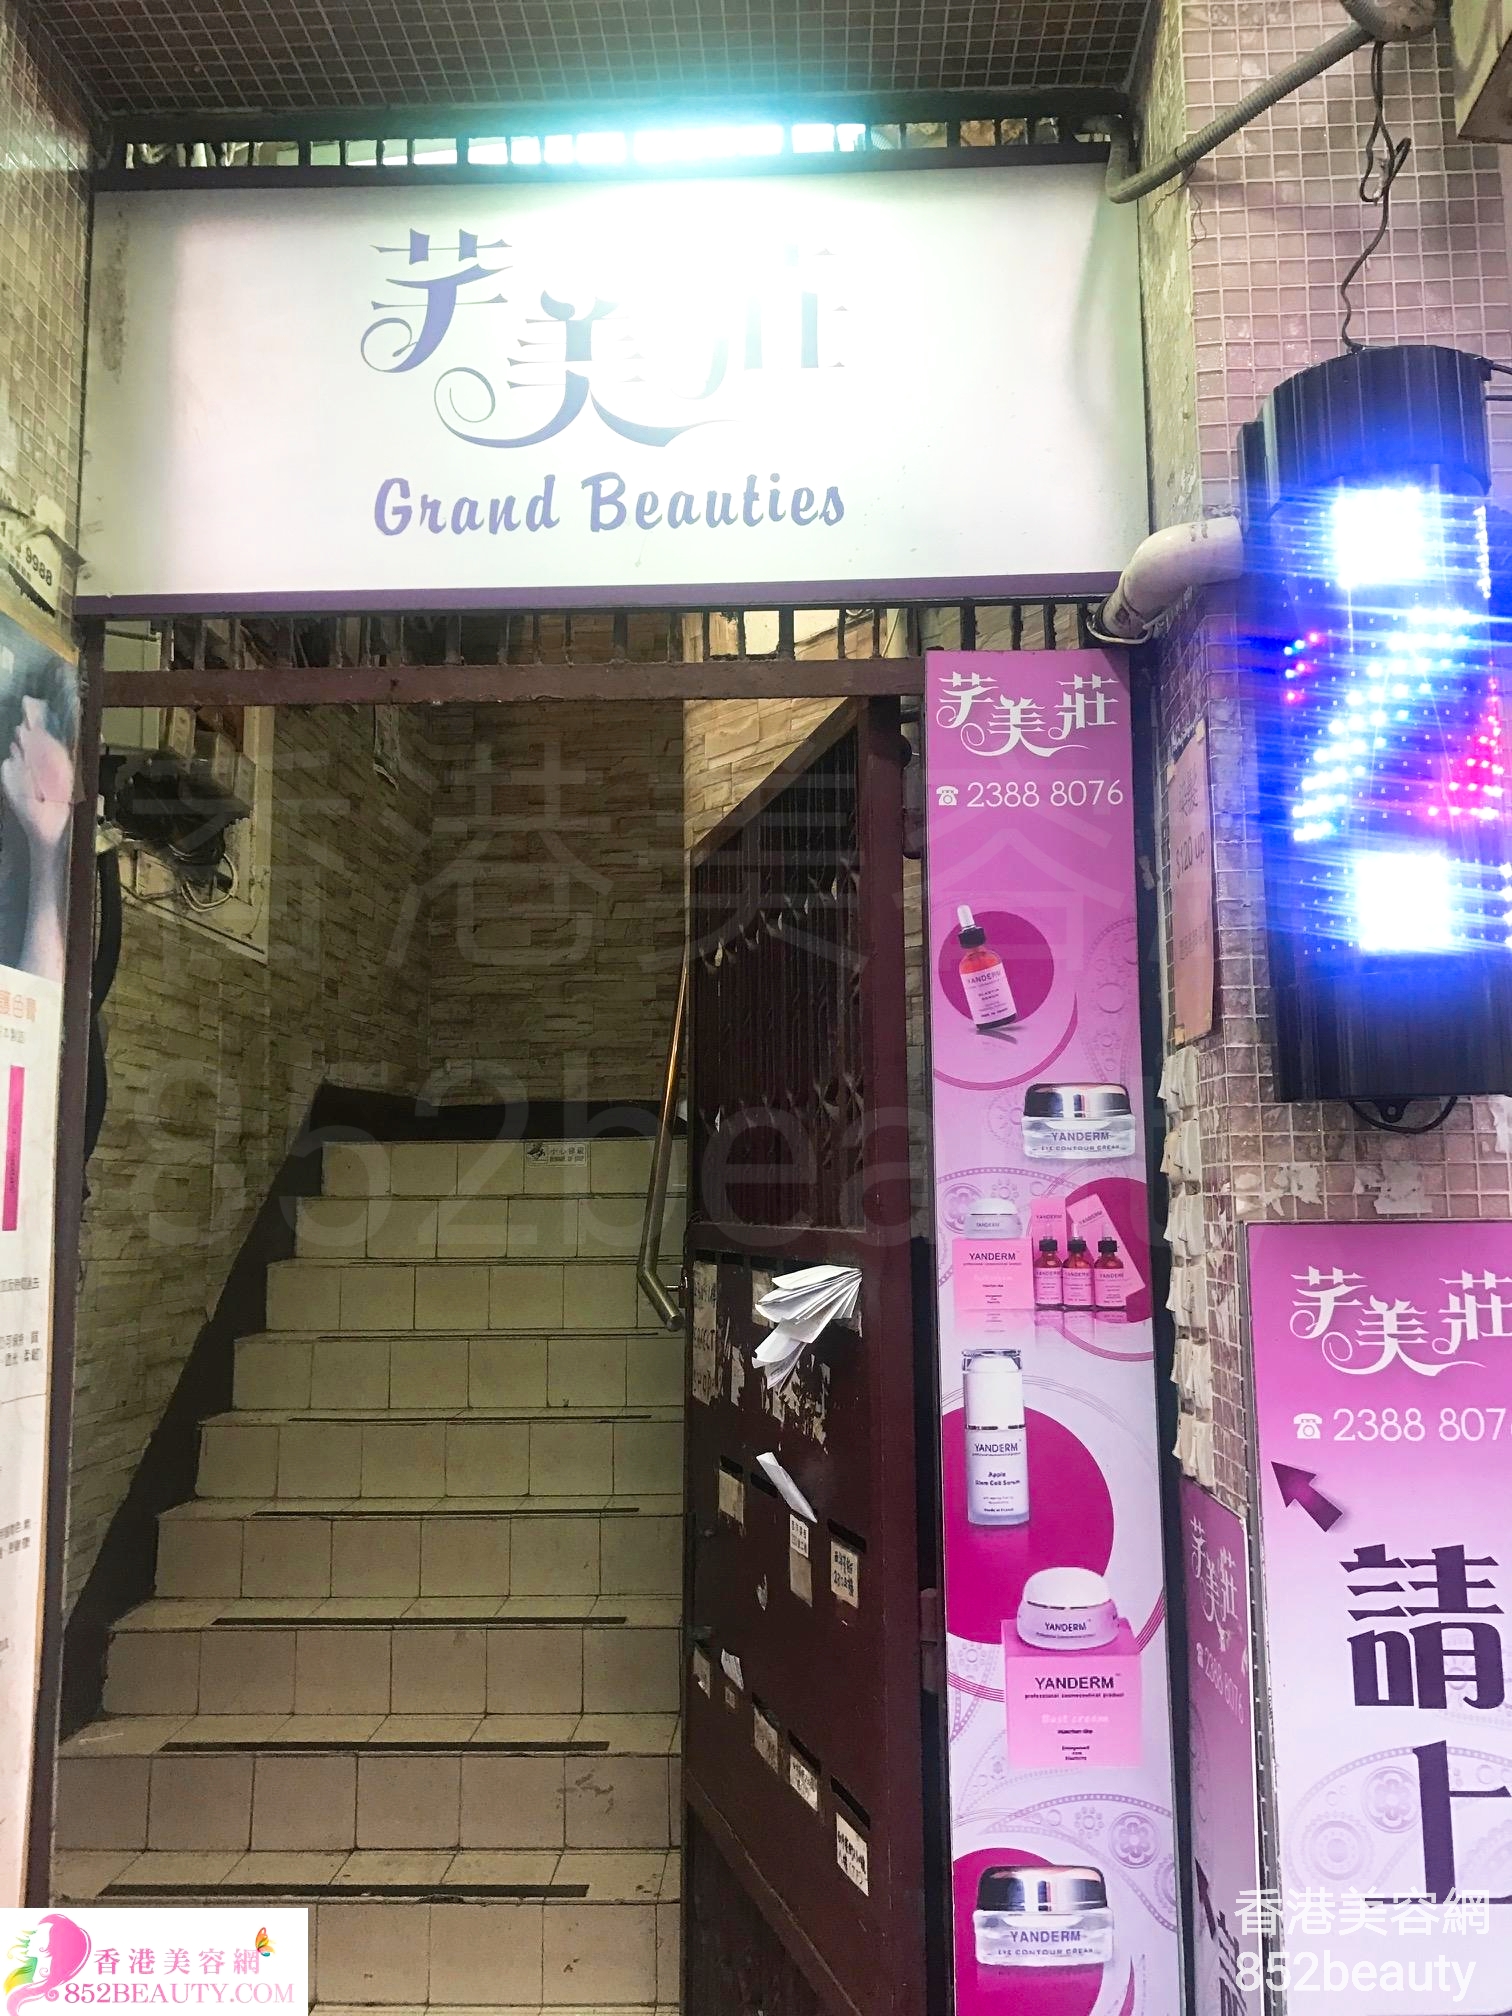 Hand and foot care: 芊美莊 Grand Beauties